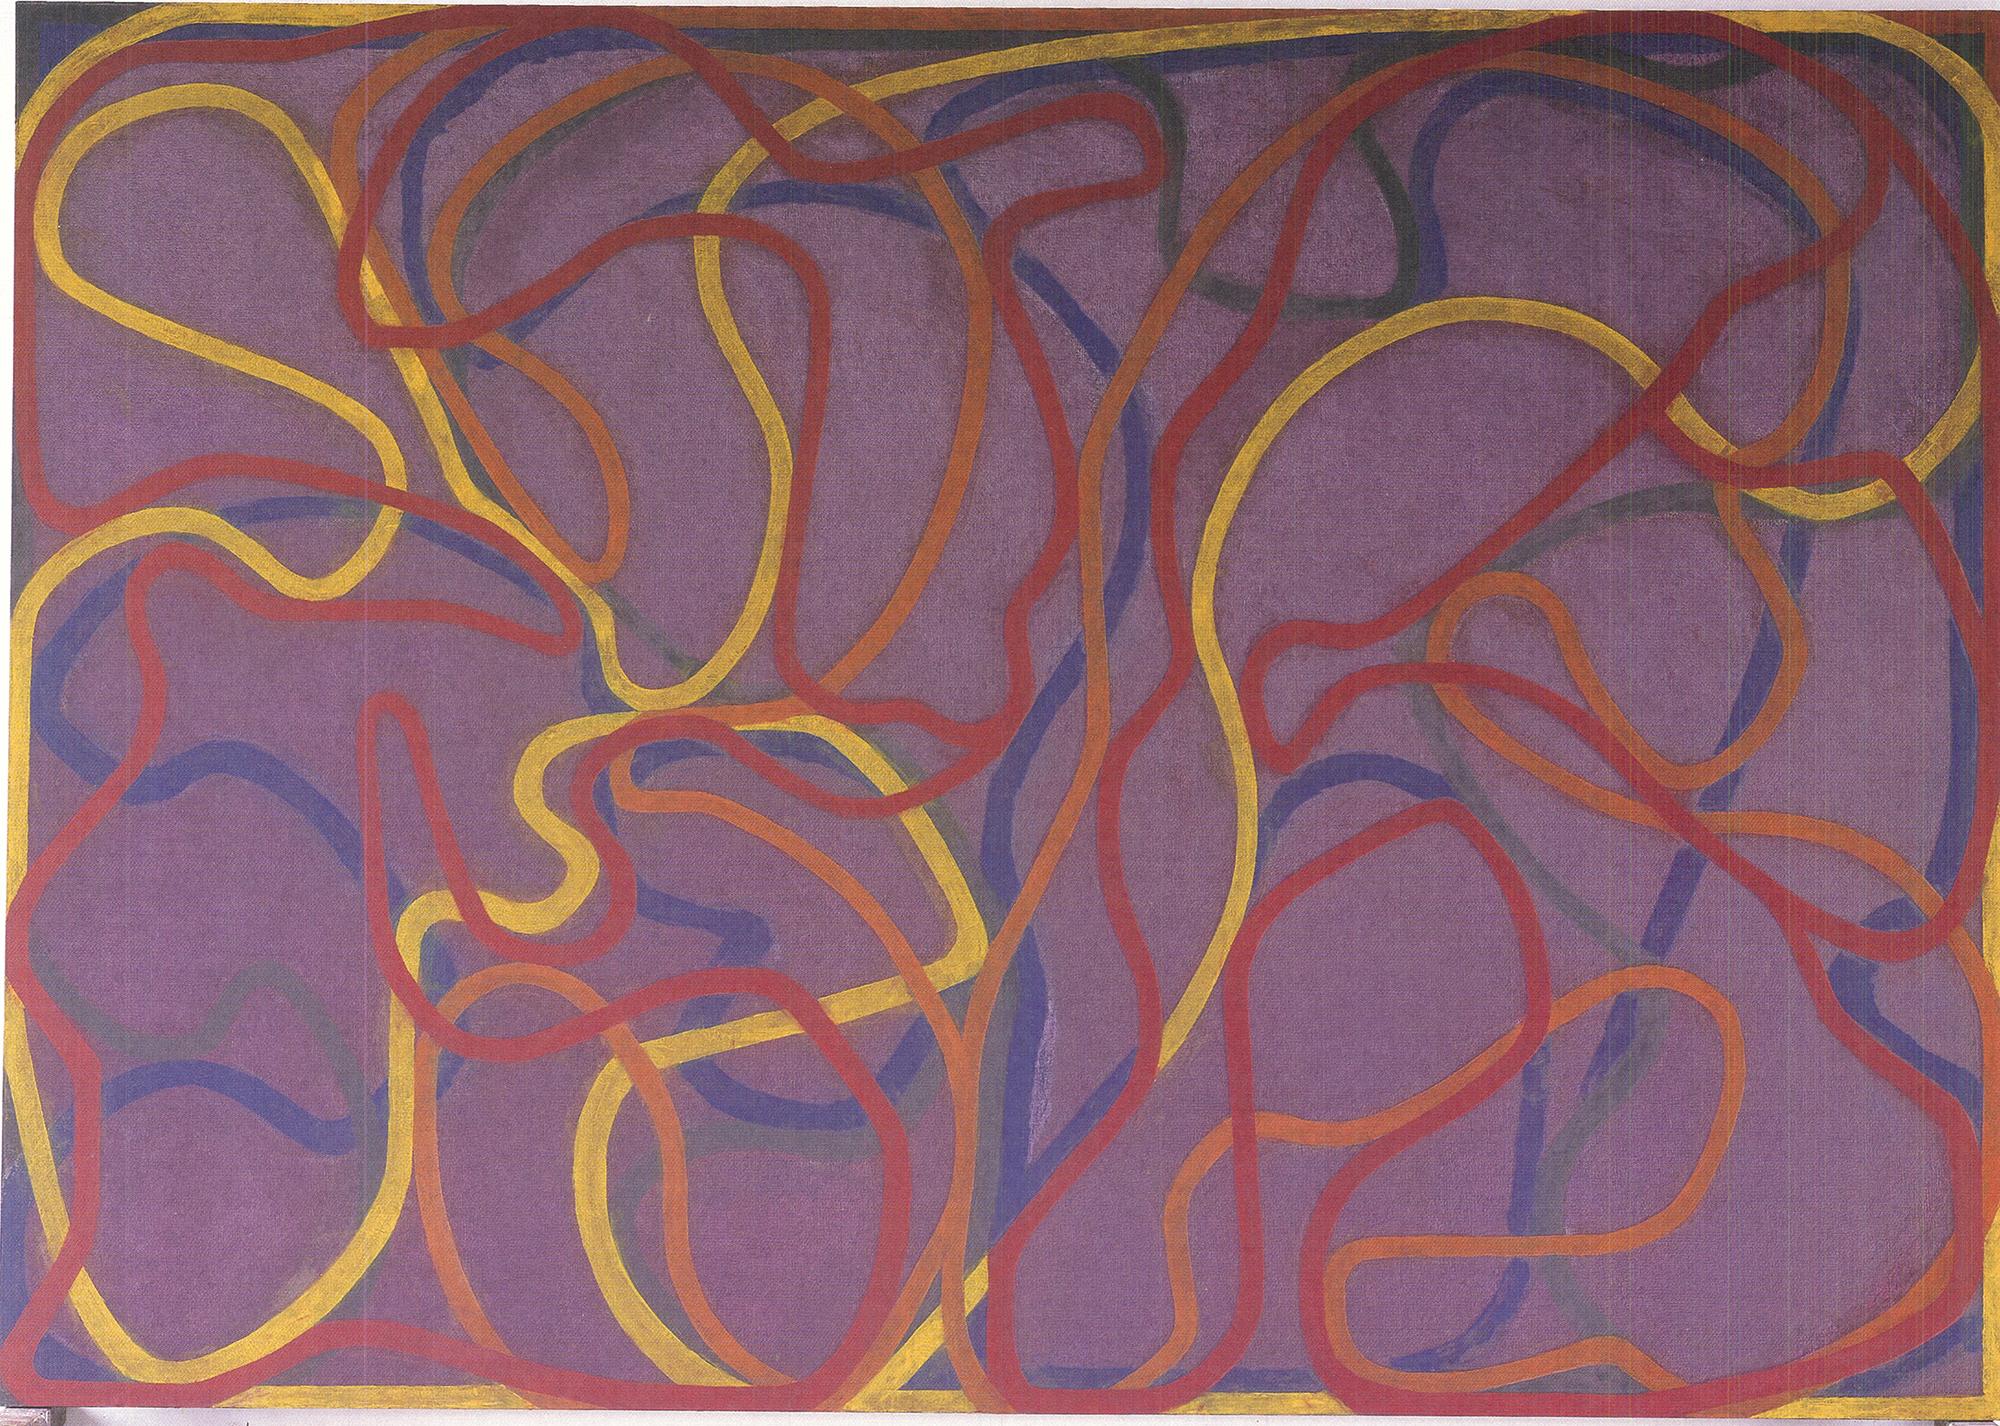 Original exhibition poster for Brice Marden at Matthew Marks Gallery in 2002. Hand signed in ballpoint pen by Marden.